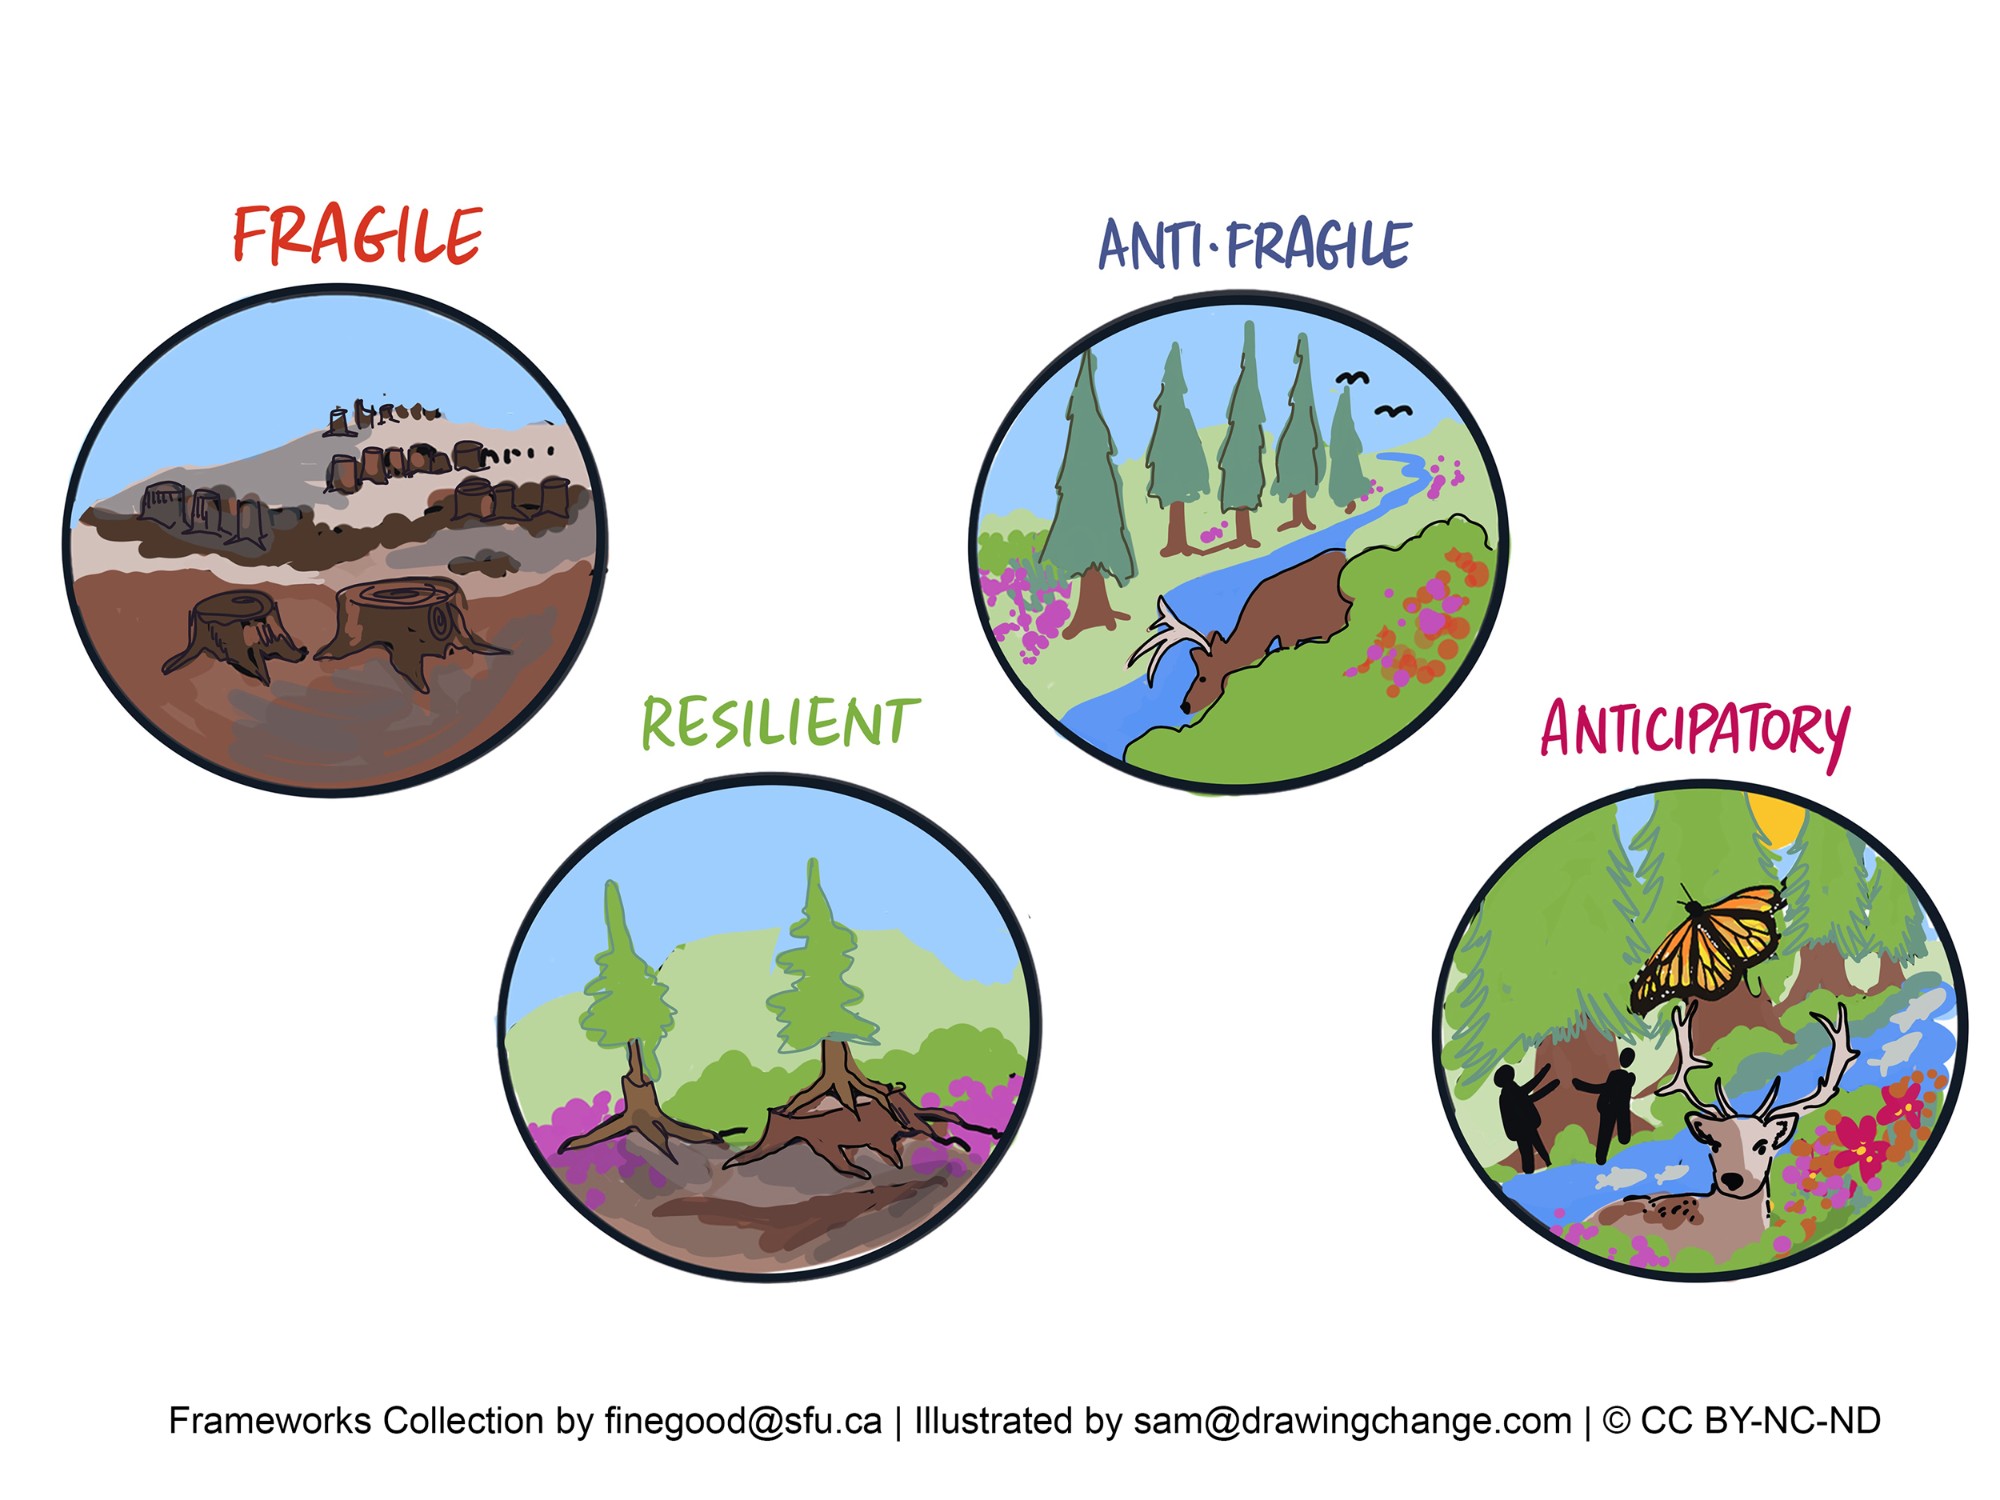 The image features four circular illustrations, each labeled with a different quality of system states: FRAGILE, RESILIENT, ANTIFRAGILE, and ANTICIPATORY.  1. FRAGILE: Depicts a barren landscape with cracked ground and dead trees, alongside ruins, indicating a system that has broken down or failed to withstand stress.  2. RESILIENT: Shows a forest with a couple of trees uprooted, but the rest of the forest remains intact, representing the ability to recover from disturbances.  3. ANTIFRAGILE: Illustrates a thriving forest with a deer leaping by a river, symbolizing a system that improves or grows stronger when faced with challenges.  4. ANTICIPATORY: Displays a scene with a butterfly, deer, and two people, with a forest in the background, suggesting a system that anticipates and prepares for future challenges.  Each circle is drawn in a colorful, illustrative style. This visual metaphor emphasizes different responses to adversity, ranging from failure to proactive adaptation. The Frameworks Collection by finegood@sfu.ca created this, and it's illustrated by sam@drawingchange.com, with a Creative Commons license (CC BY-NC-ND). The illustrations serve to convey complex concepts through accessible imagery.